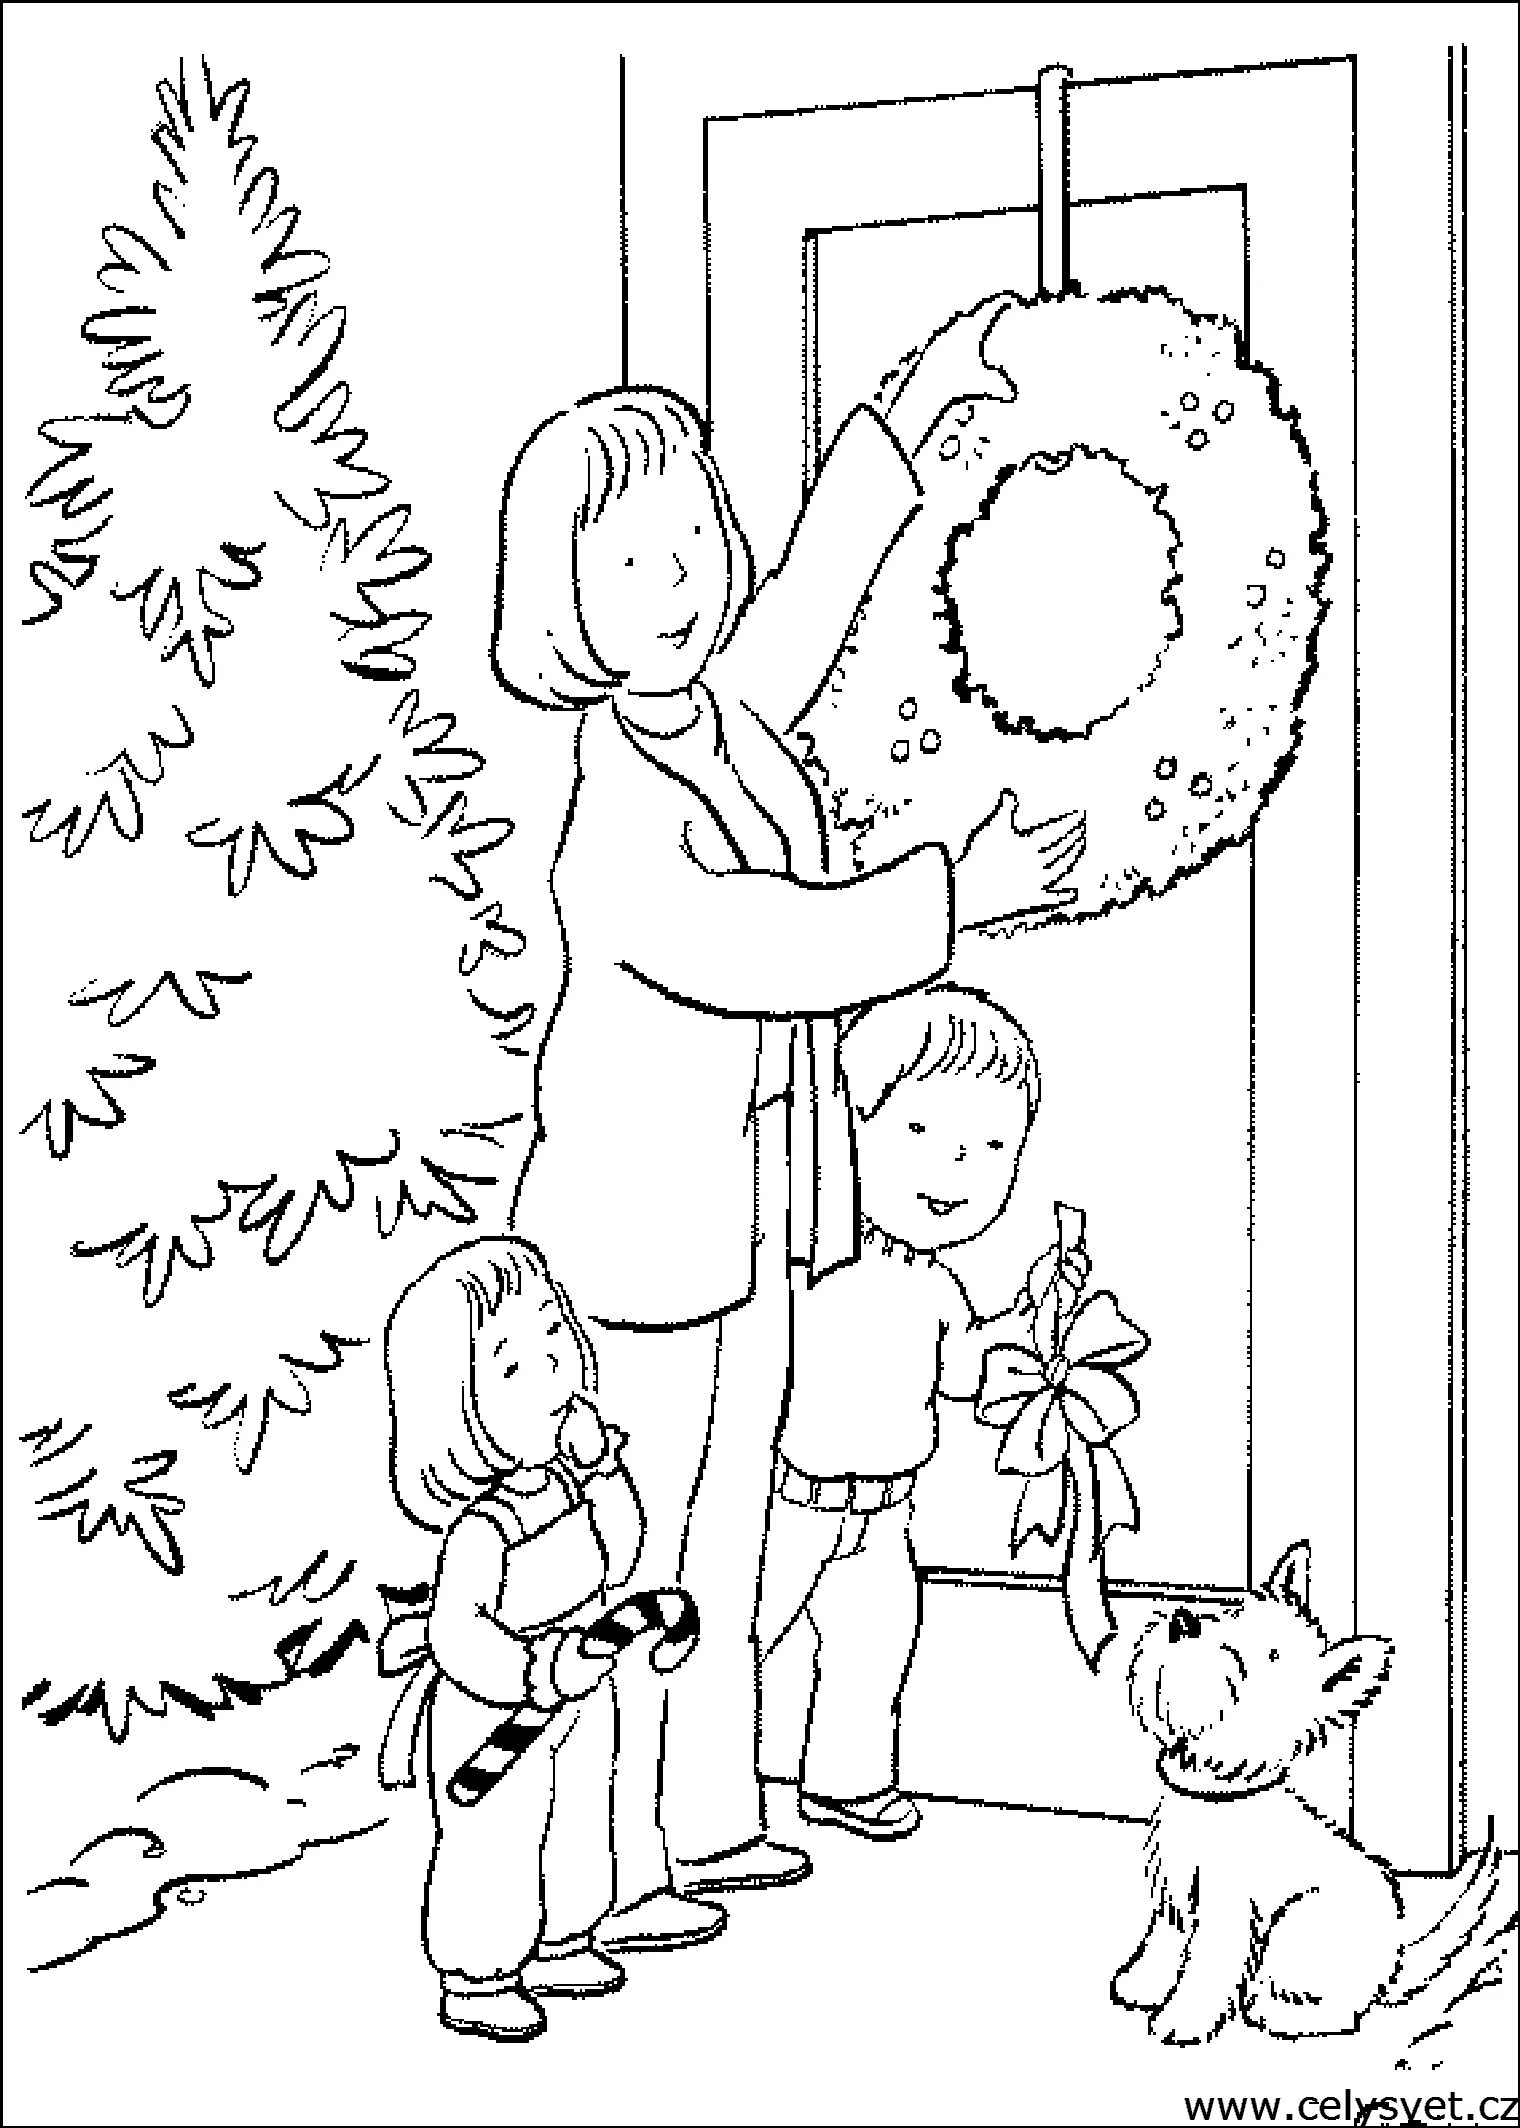 Amazing Christmas family coloring book